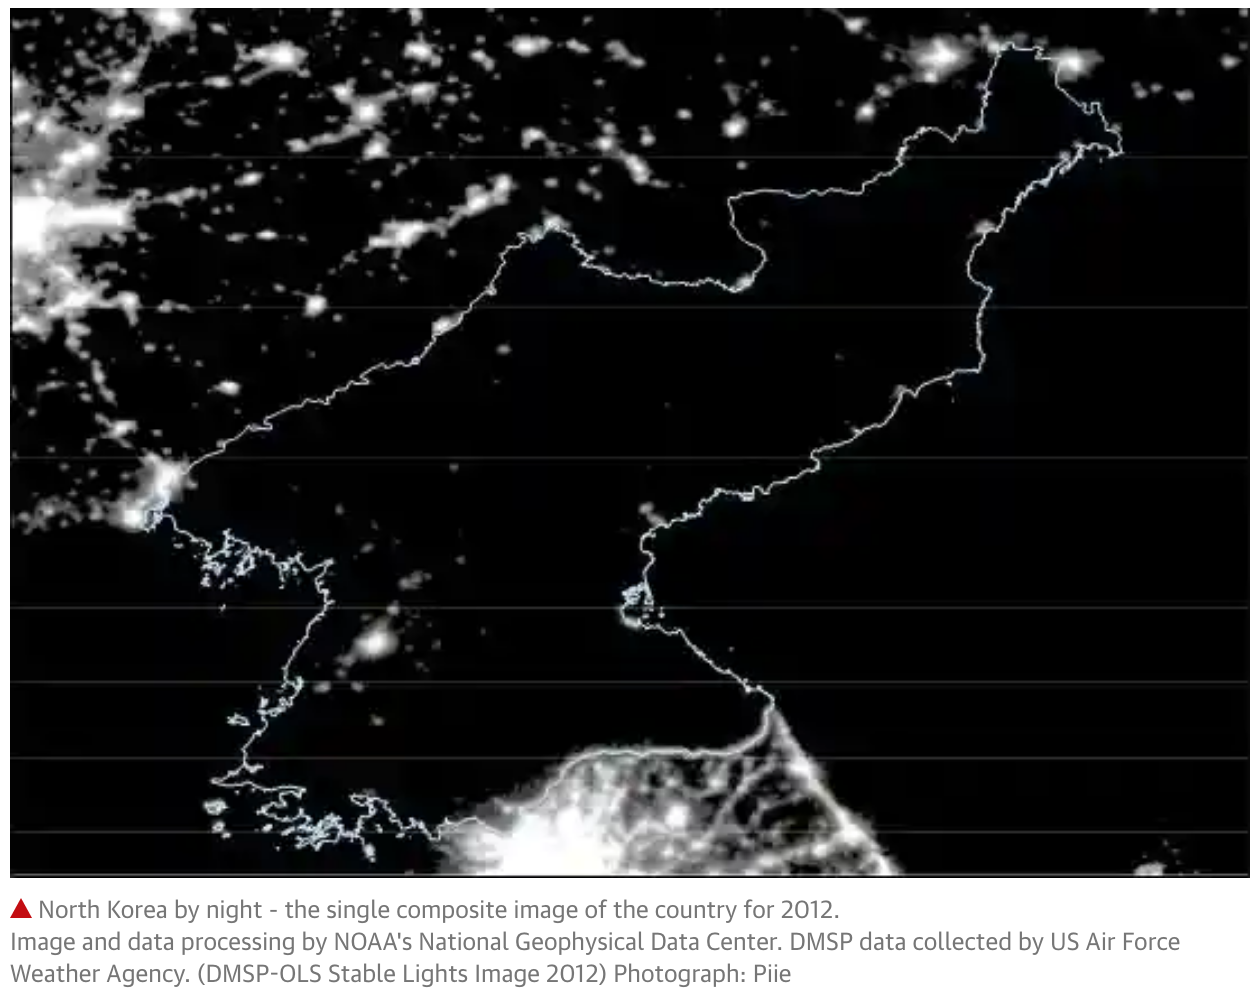 North Korea by night: satellite images shed new light on the secretive state